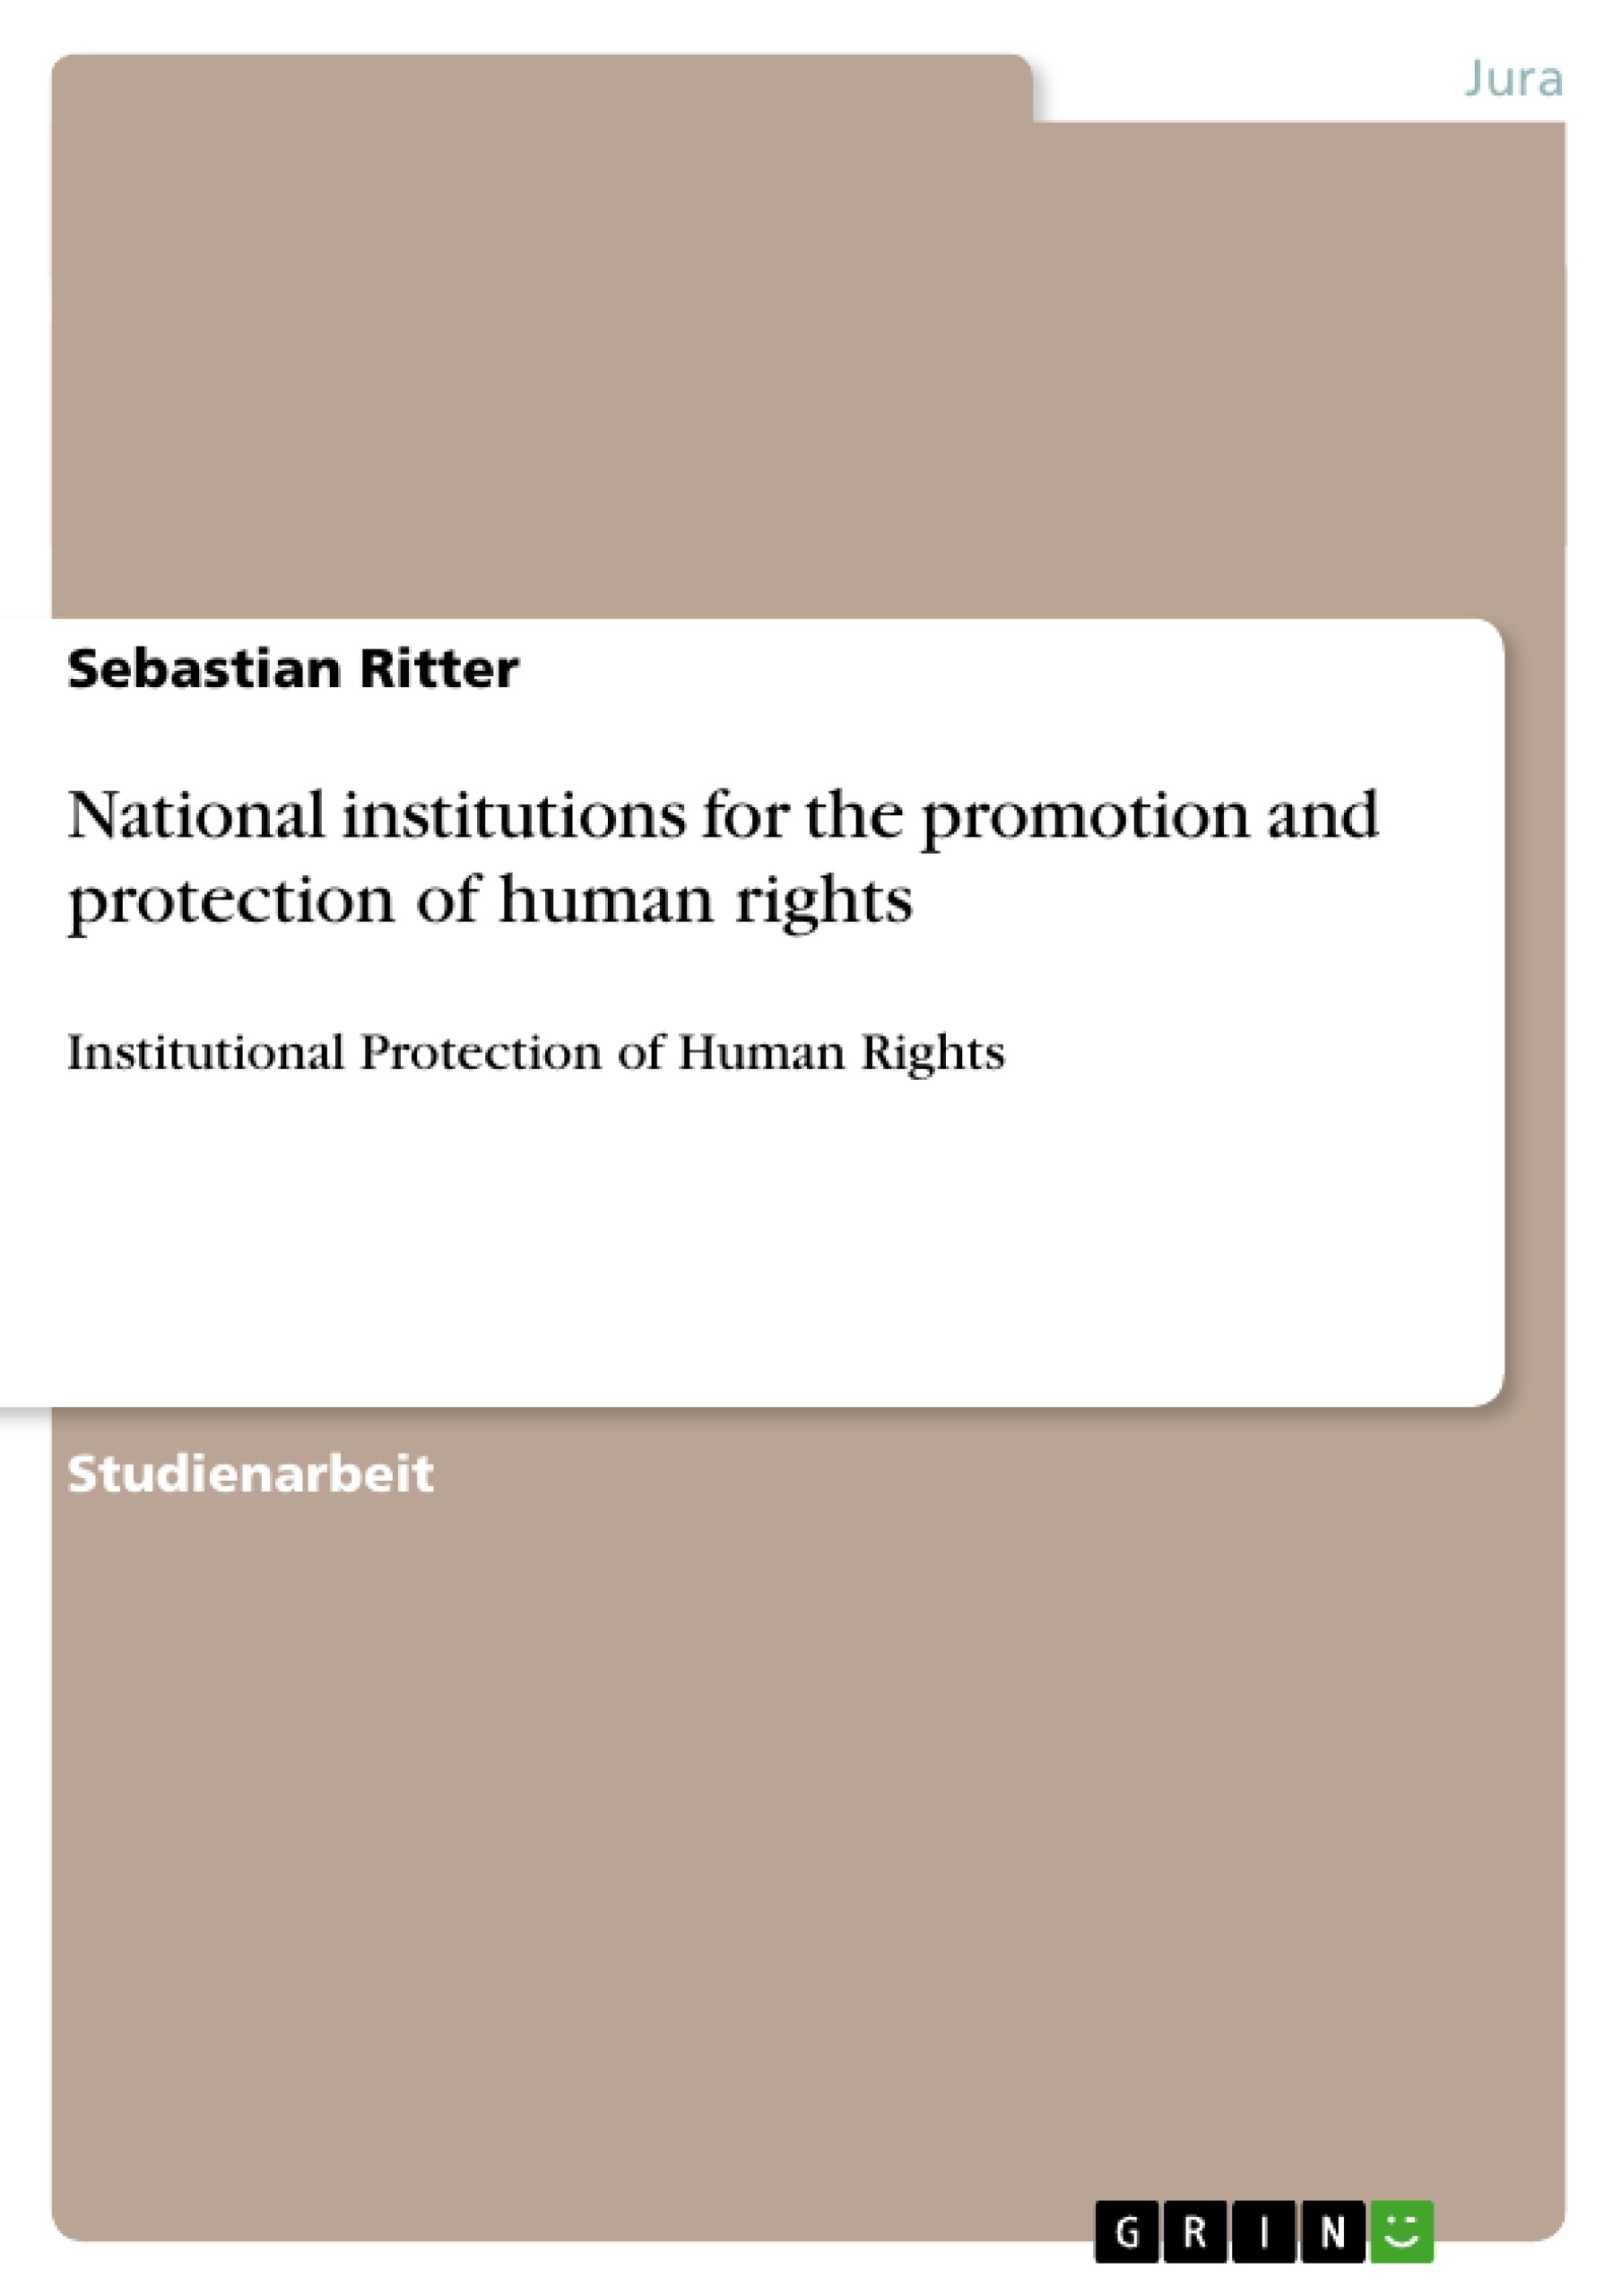 Titel: National institutions for the promotion and protection of human rights